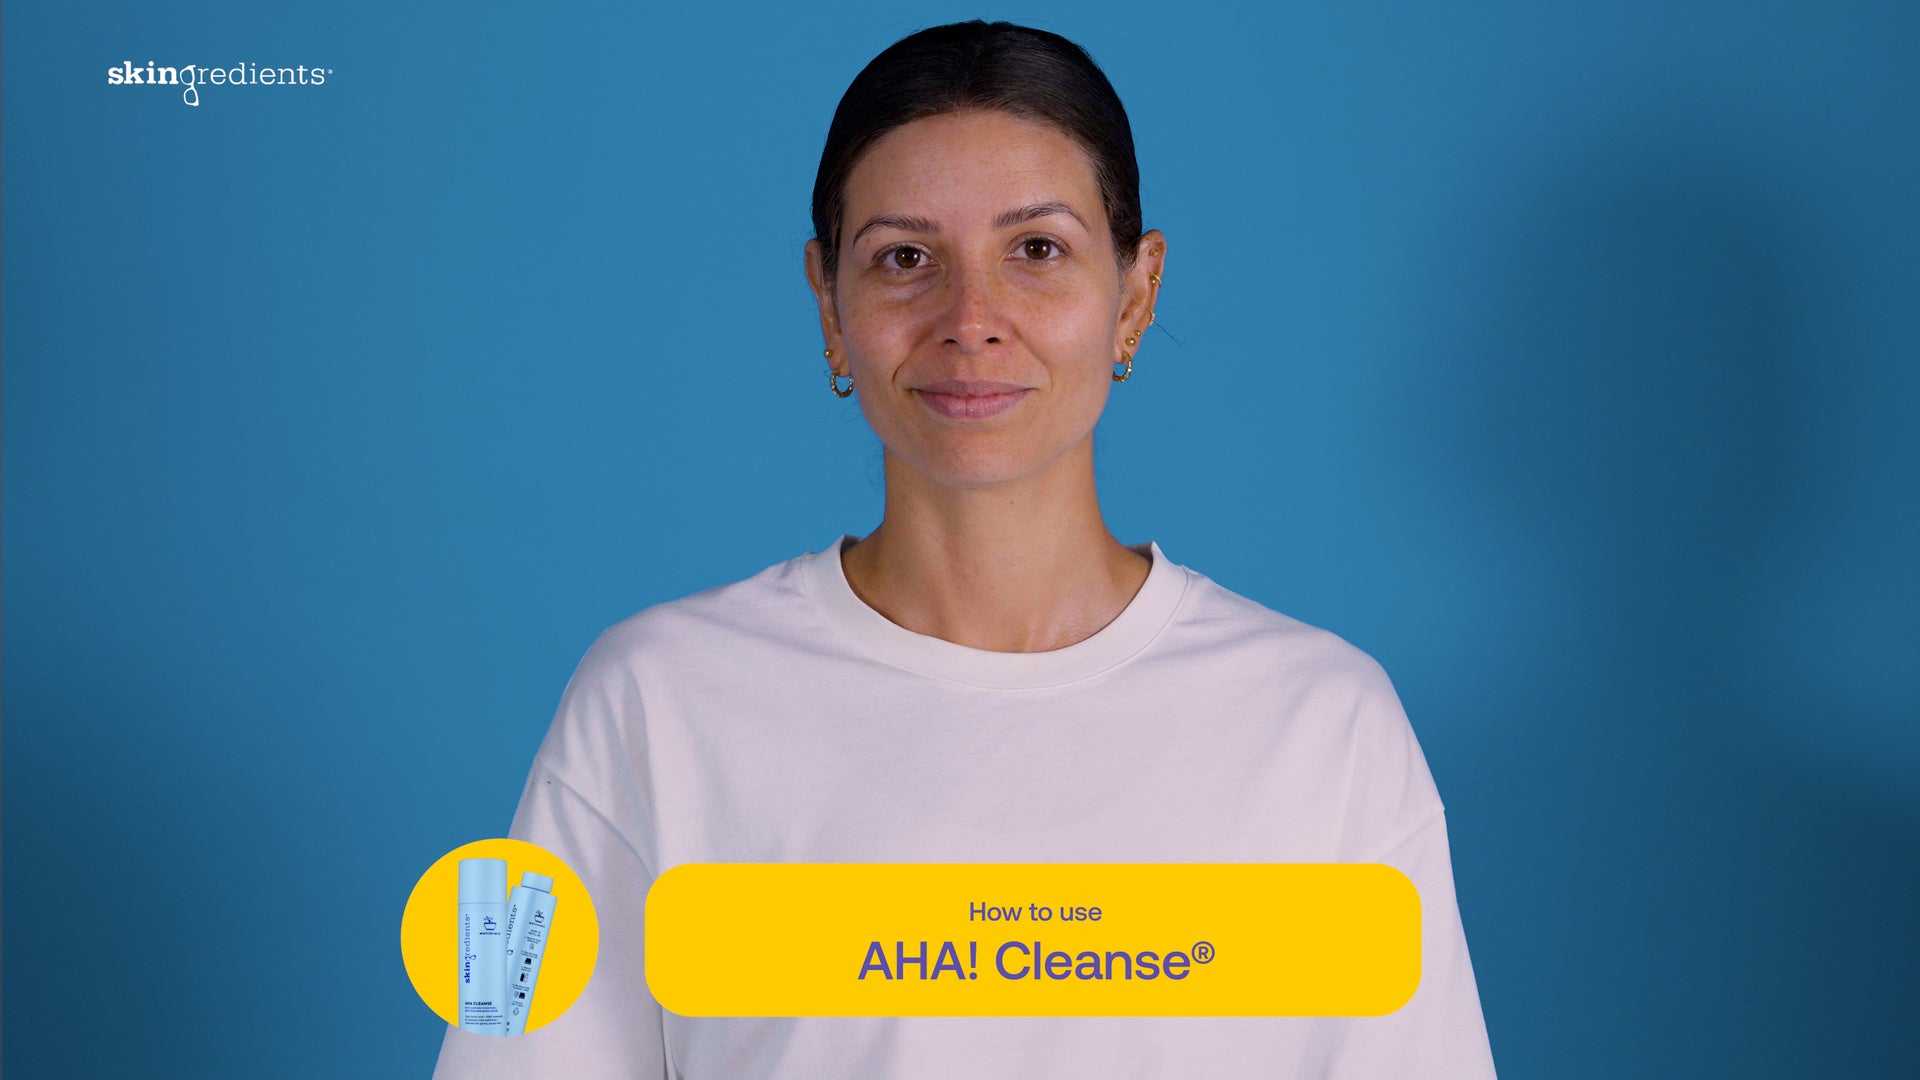 Load video: &lt;p&gt;Meet your ultimate AHA Brightening + Exfoliating Lactic Acid Cleanser Starter Kit containing your pack for life (Primary!) + your first value-saving refill pack. &lt;br&gt;&lt;/p&gt;
&lt;p&gt;&lt;strong&gt;This bundle includes:&lt;/strong&gt;&lt;/p&gt;
&lt;p&gt;&lt;strong&gt;Skingredients® AHA! Cleanse® (100ml) Primary + Refill.&lt;/strong&gt; An active cleanser and micro-mask that contains 8% lactic acid and 1% PHA, which work in harmony to brighten, exfoliate, hydrate and plump the skin. Part of the Skingredients Match + Mix range, use AHA Cleanse 2 to 3 times a week, alternating with PreProbiotic Cleanse, for luminous, glowing skin. Lactic acid is an alpha-hydroxy acid that exfoliates the skin by gently loosening and sweeping away dead skin cells from the skin’s surface.&lt;br&gt; This cleanser promotes smooth, even skin and increases the rate of skin cell turnover. Exfoliating yet importantly also hydrating, our nerdie panellists have been loving the instant glowing results whilst not over-exfoliating the skin. Found your favourite new way to GLOW?&lt;br&gt;&lt;/p&gt;
&lt;p&gt;&lt;strong&gt;FREE COMplimentary Cleanse Off Mitt:&lt;/strong&gt;&lt;span&gt; The ideal accompaniment to a double cleanse, the Cleanse off Mitt (COM) is a travel-friendly, reusable cleansing companion. An eco-friendly alternative to one-use cotton wool and wipes, it removes all traces of makeup naturally – including stubborn mascara. For an effective pre-cleanse, just add water, gently swipe the mitt across your face and watch as all traces of makeup disappear.&lt;/span&gt;&lt;/p&gt;
&lt;p&gt;&lt;strong&gt;Nerdie Note:&lt;/strong&gt; Make sure you keep your primary pack (tube-for-life that’s made from resilient, ultra-durable materials!) and continue to replenish with our value-saving planet-friendly refill tubes.&lt;/p&gt;